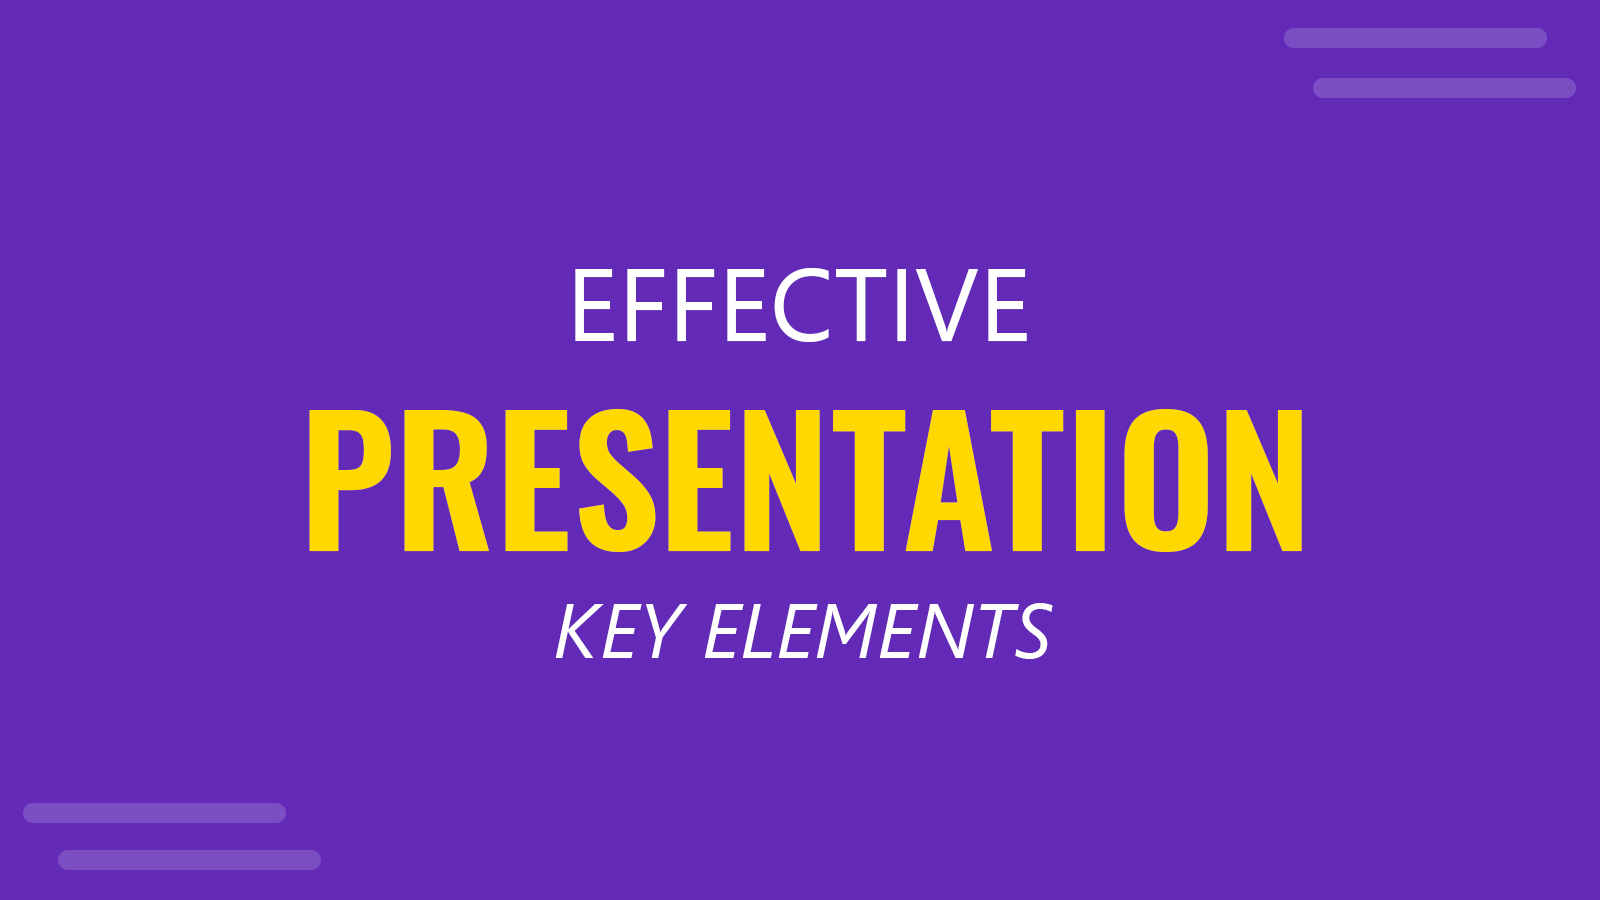 The Key Elements of an Effective Presentation